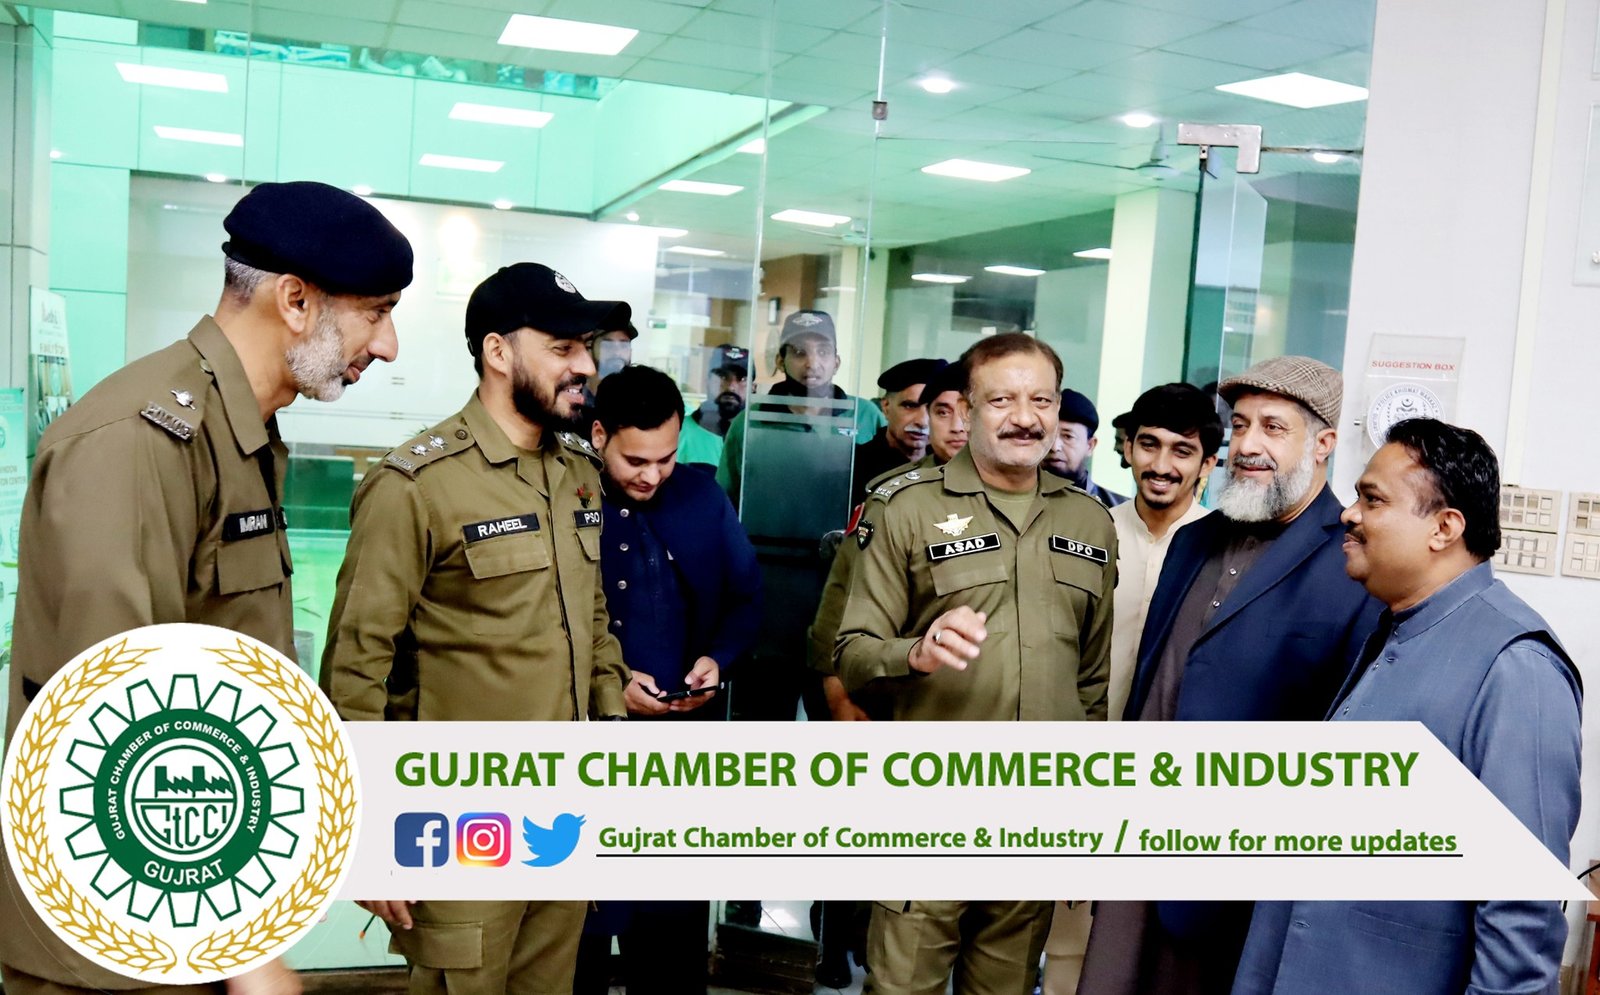 #DPO #Gujrat Mr. Syed Asad Muzaffar visited Gujrat Chamber of Commerce & Industry and attended a #meeting #session with #BusinessCommunity of #Gujrat. The meeting was #chaired by Mr. Choudhary Muhammad Asad Bhatti #SeniorVicePresident #GtCCI and on the #occasion Mr. Haji Nasir Mehmood #GroupLeader #ShaheenGroup, #ExecutiveCommittee members and #FormerPresidents were also present.